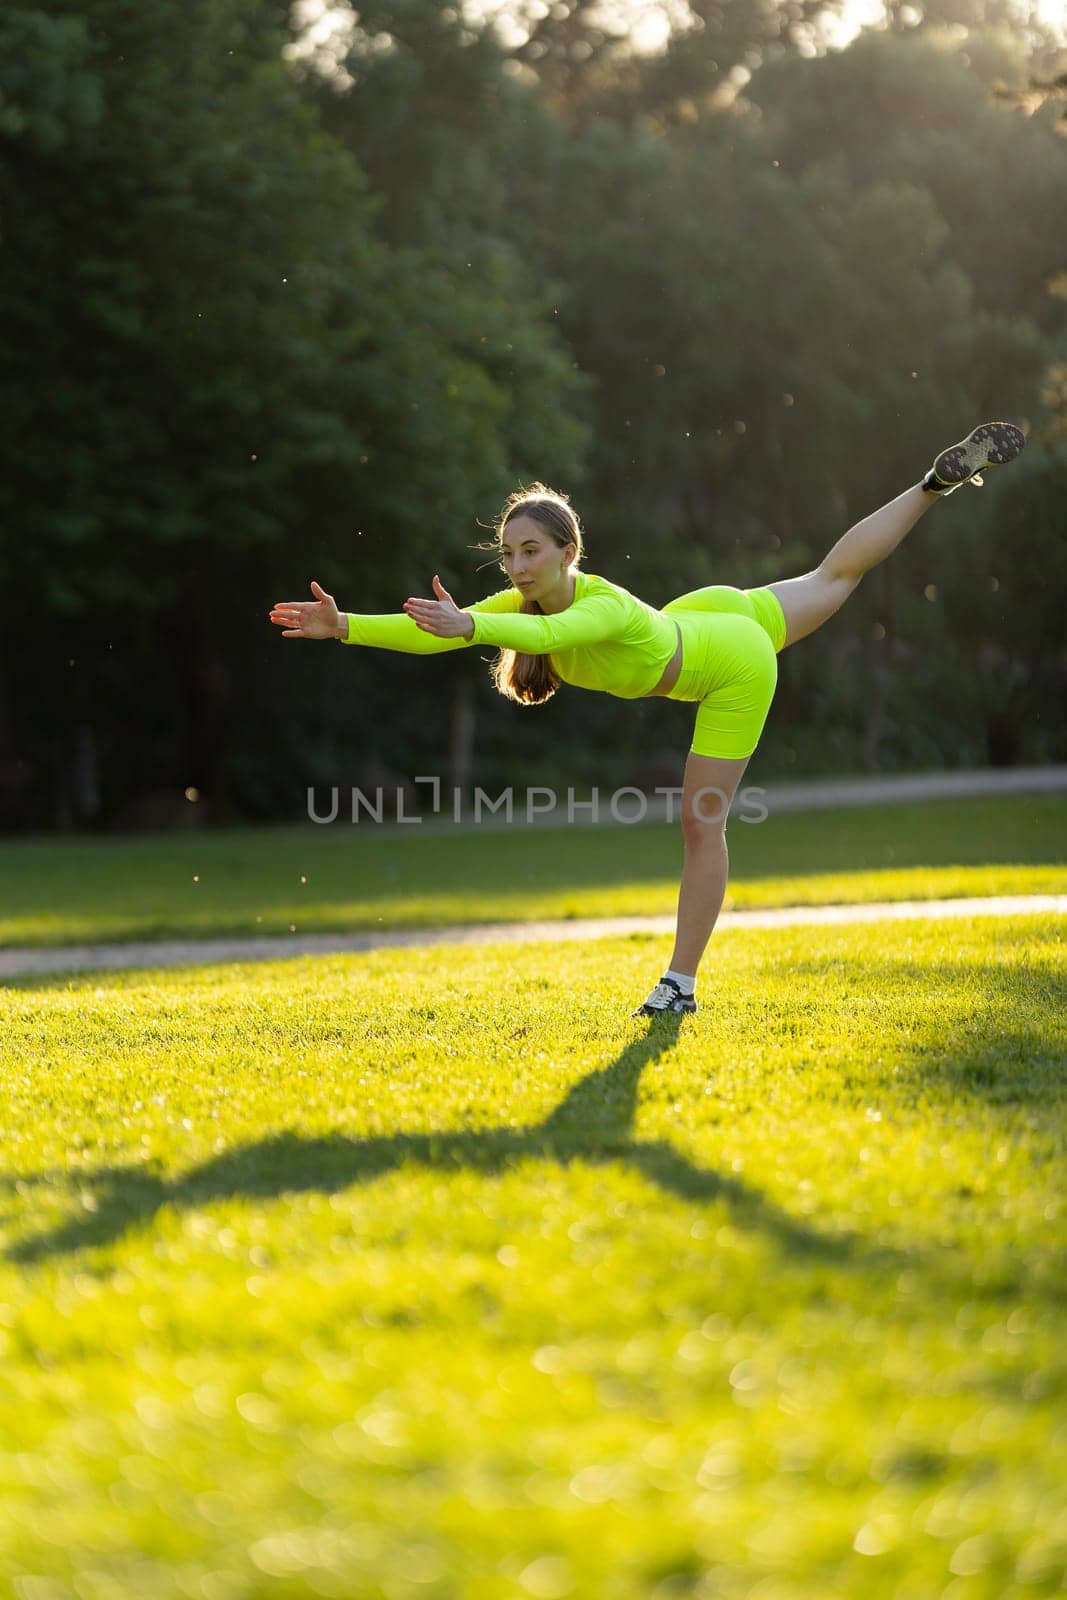 A woman in a neon yellow outfit is doing a yoga pose on a grassy field. The bright colors of her outfit and the green grass create a cheerful and energetic mood. Concept of health and fitness